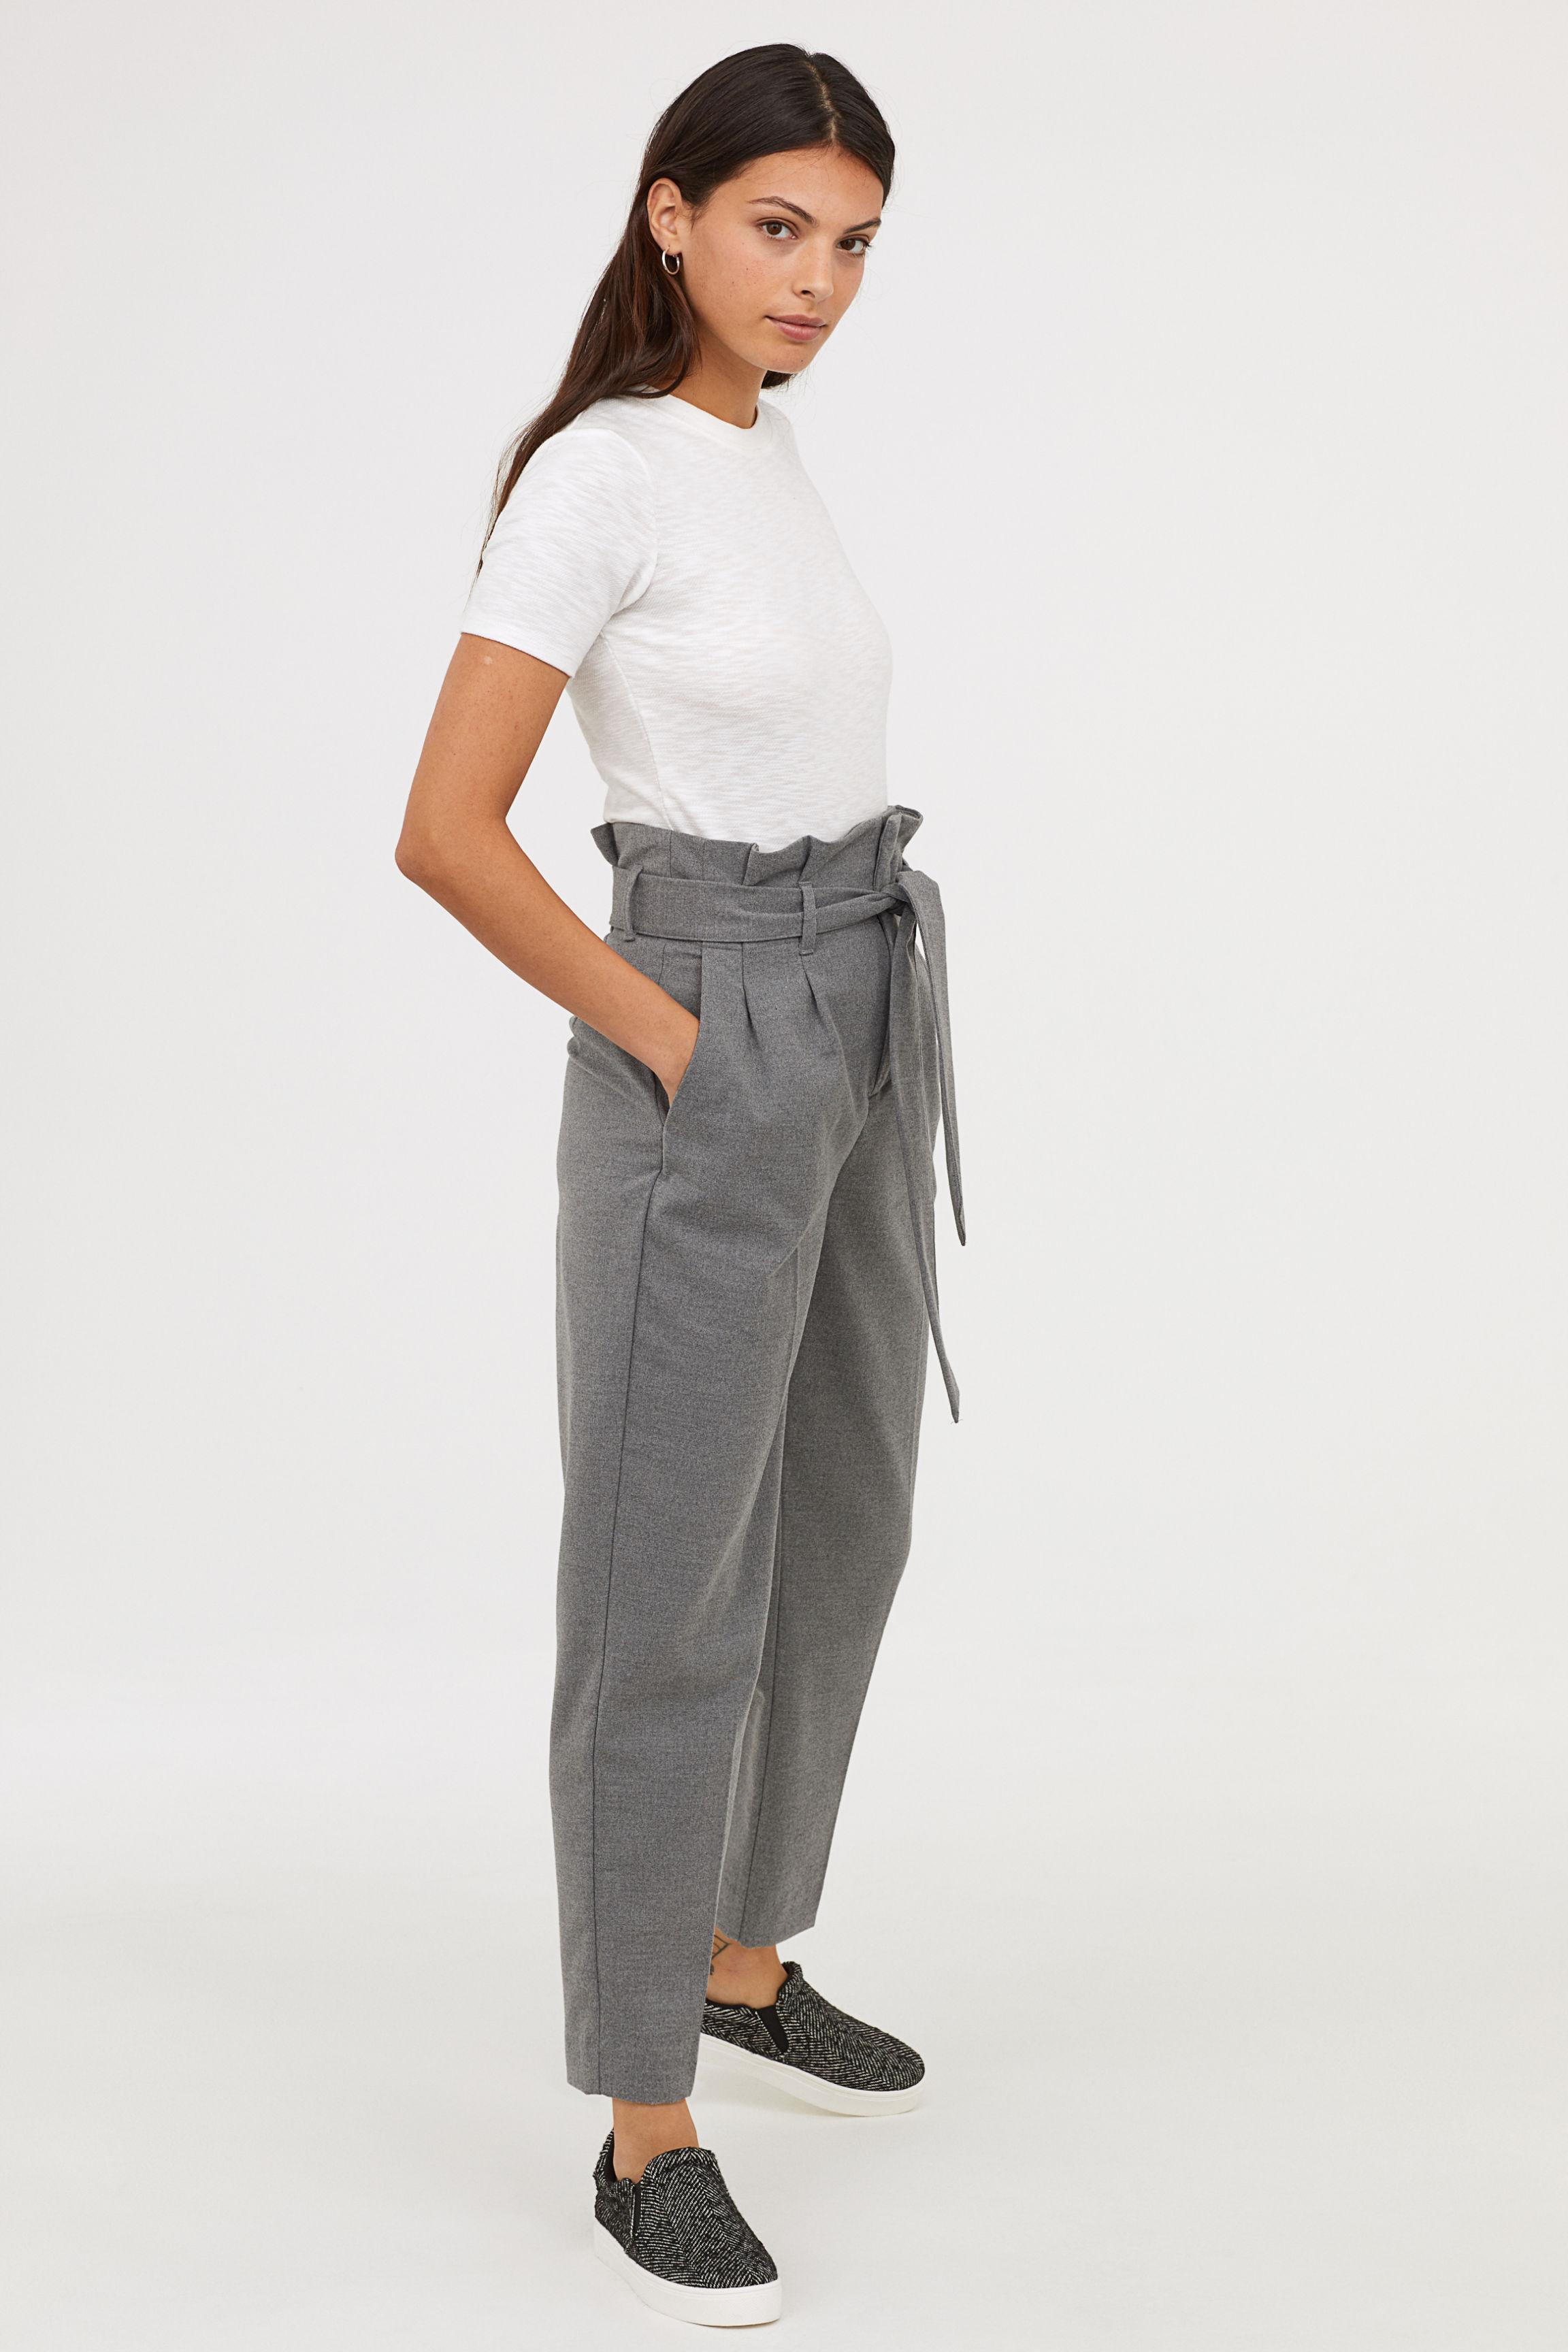 H&M Synthetic Paper Bag Trousers in Gray Melange (Gray) | Lyst